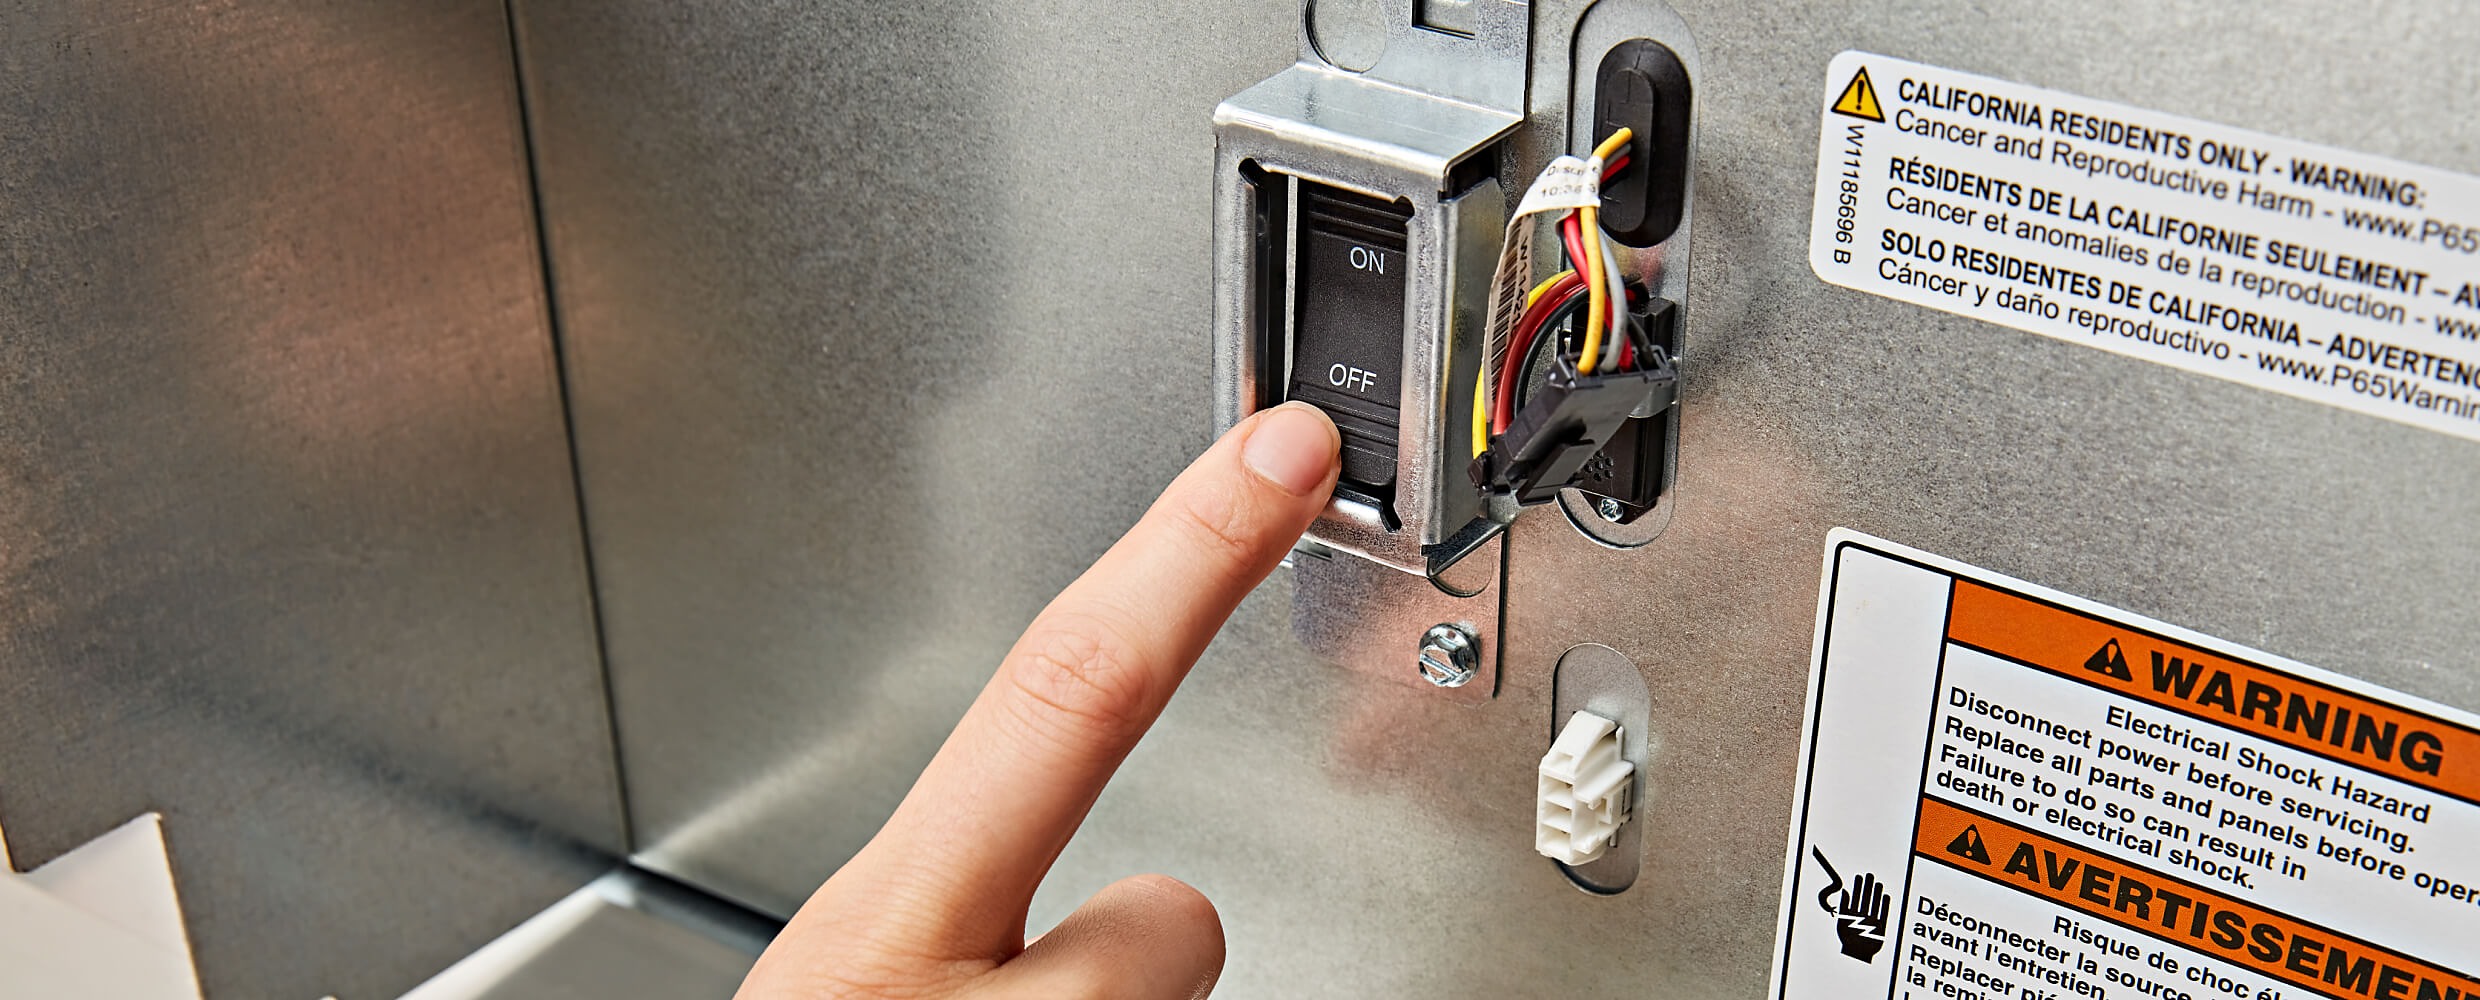 ON/OFF Power Switch of the 42" KitchenAid® Built-In Side-by-Side Refrigerator